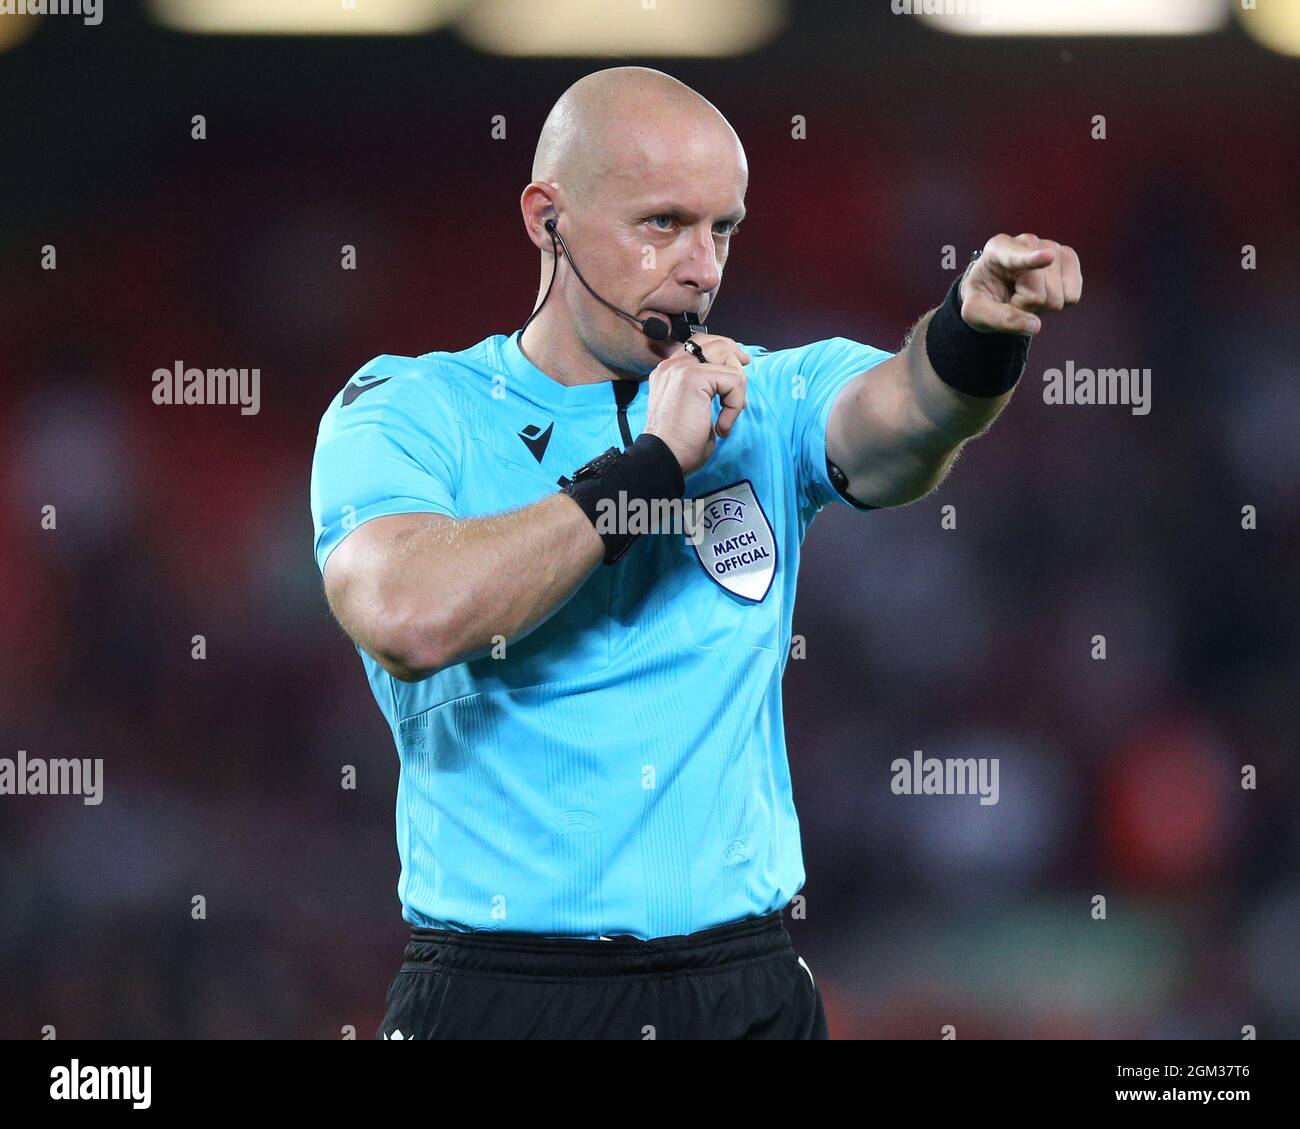 Liverpool, England, 15th September 2021. Referee Szymon Marciniak during the UEFA Champions League match at Anfield, Liverpool. Picture credit should read: Nigel French / Sportimage Stock Photo